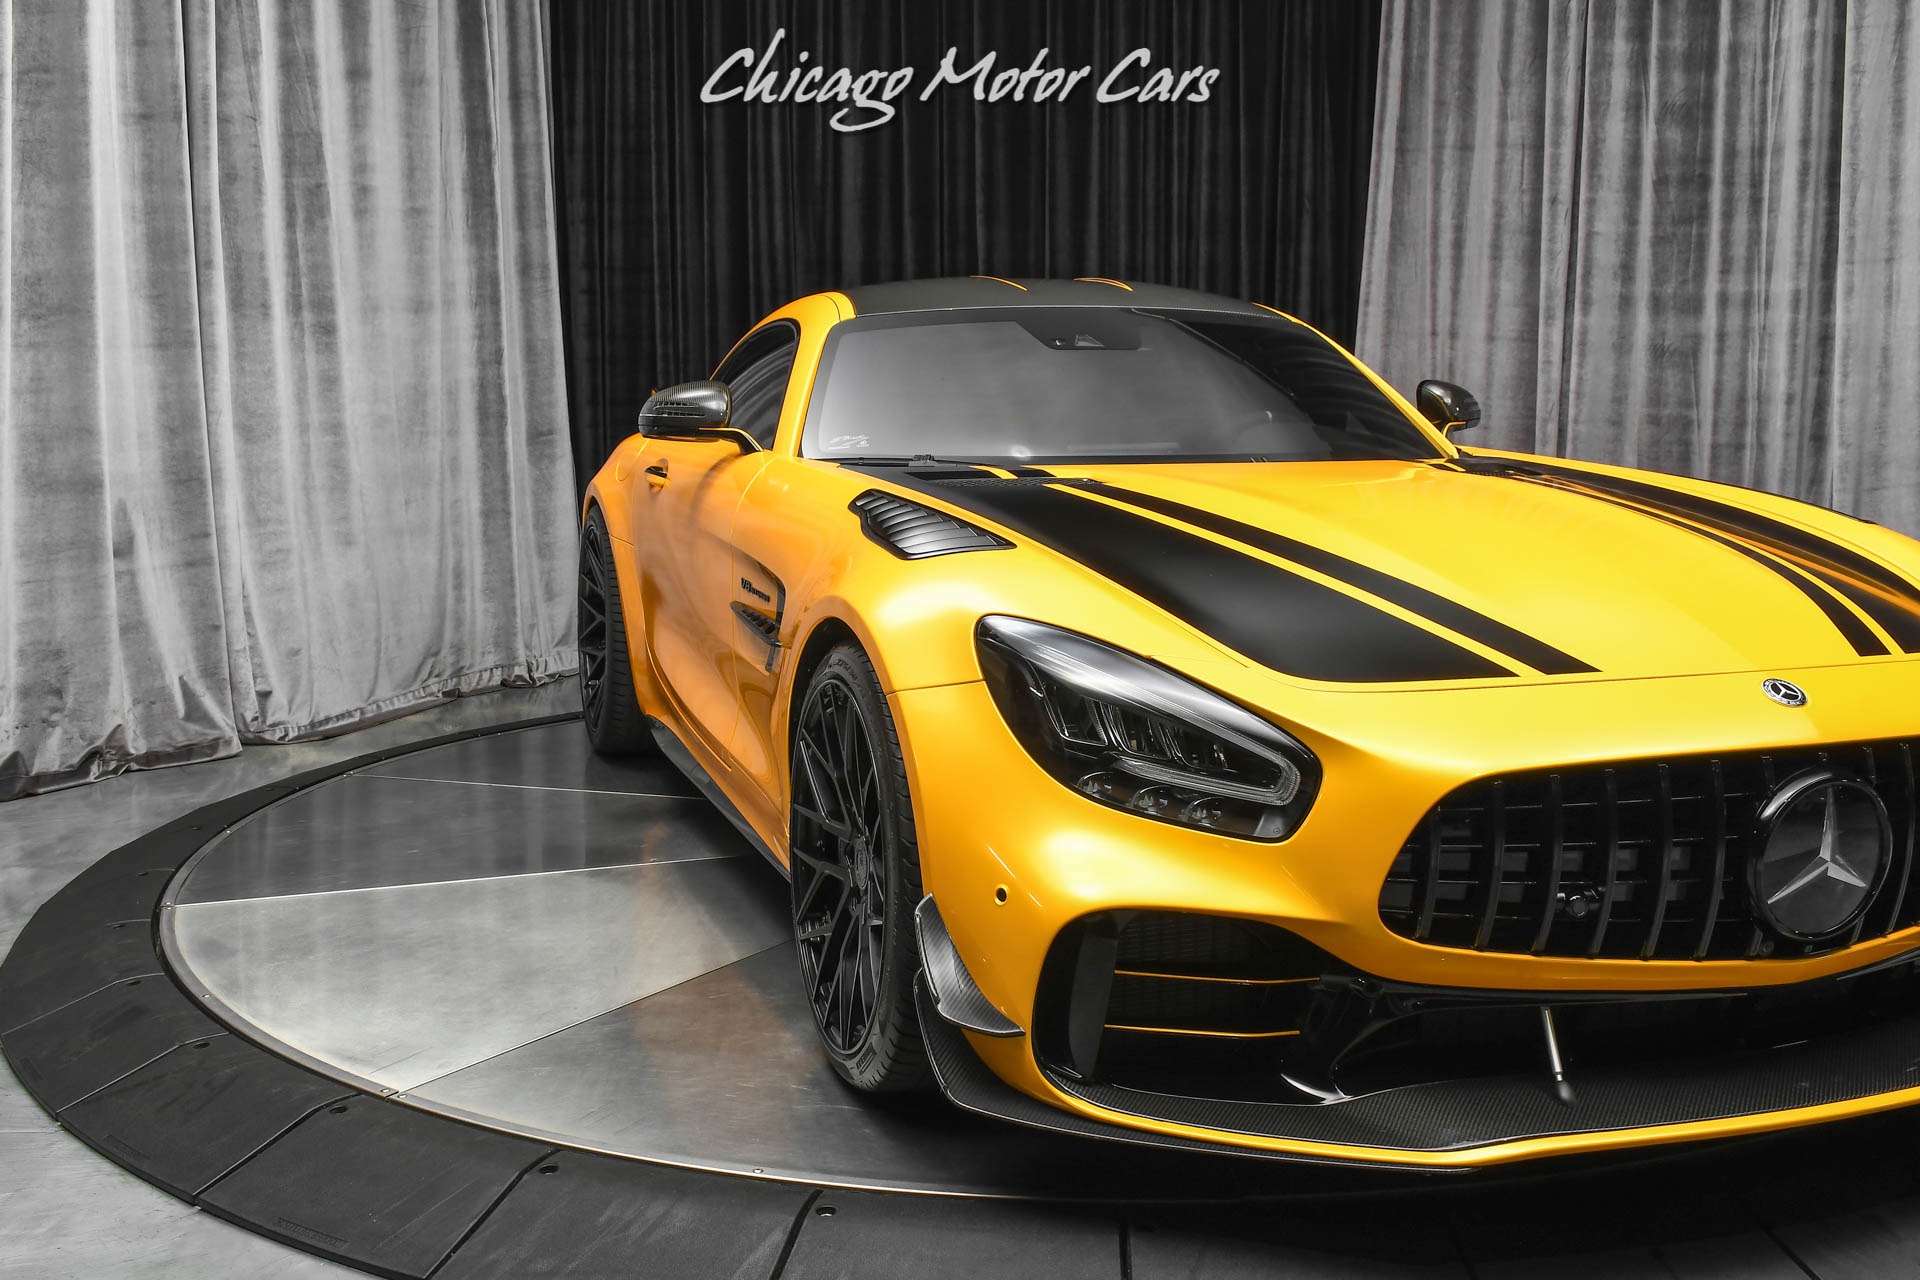 Used-2020-Mercedes-Benz-AMG-GT-R-Pro-Coupe-Ceramic-Brakes-3k-Miles-BC-Forged-Wheels-AMG-Carbon-Fiber